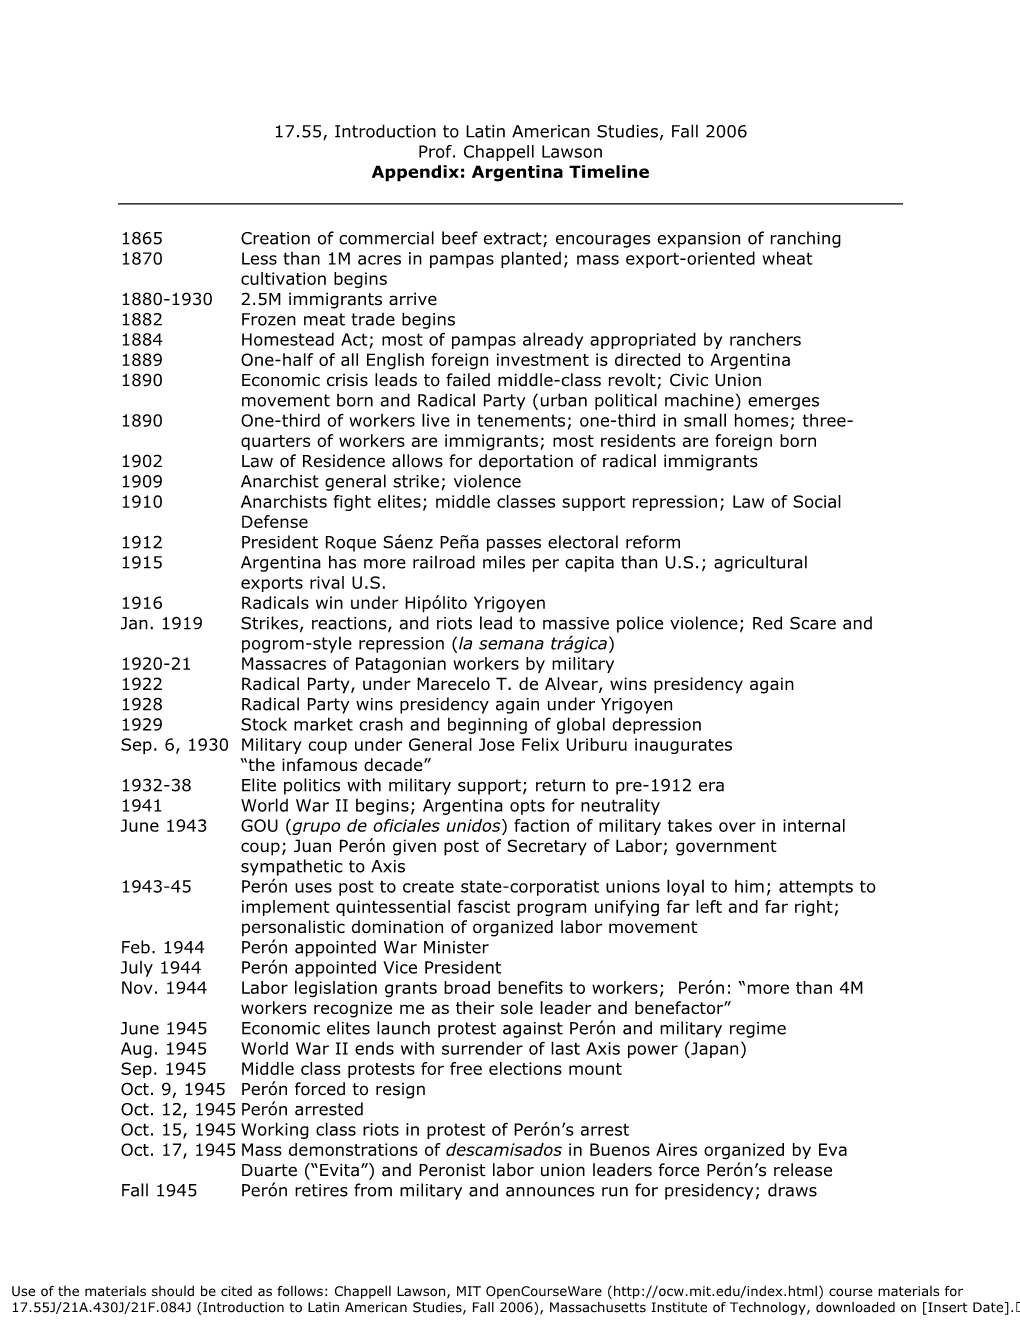 17.55, Introduction to Latin American Studies, Fall 2006 Prof. Chappell Lawson Appendix: Argentina Timeline